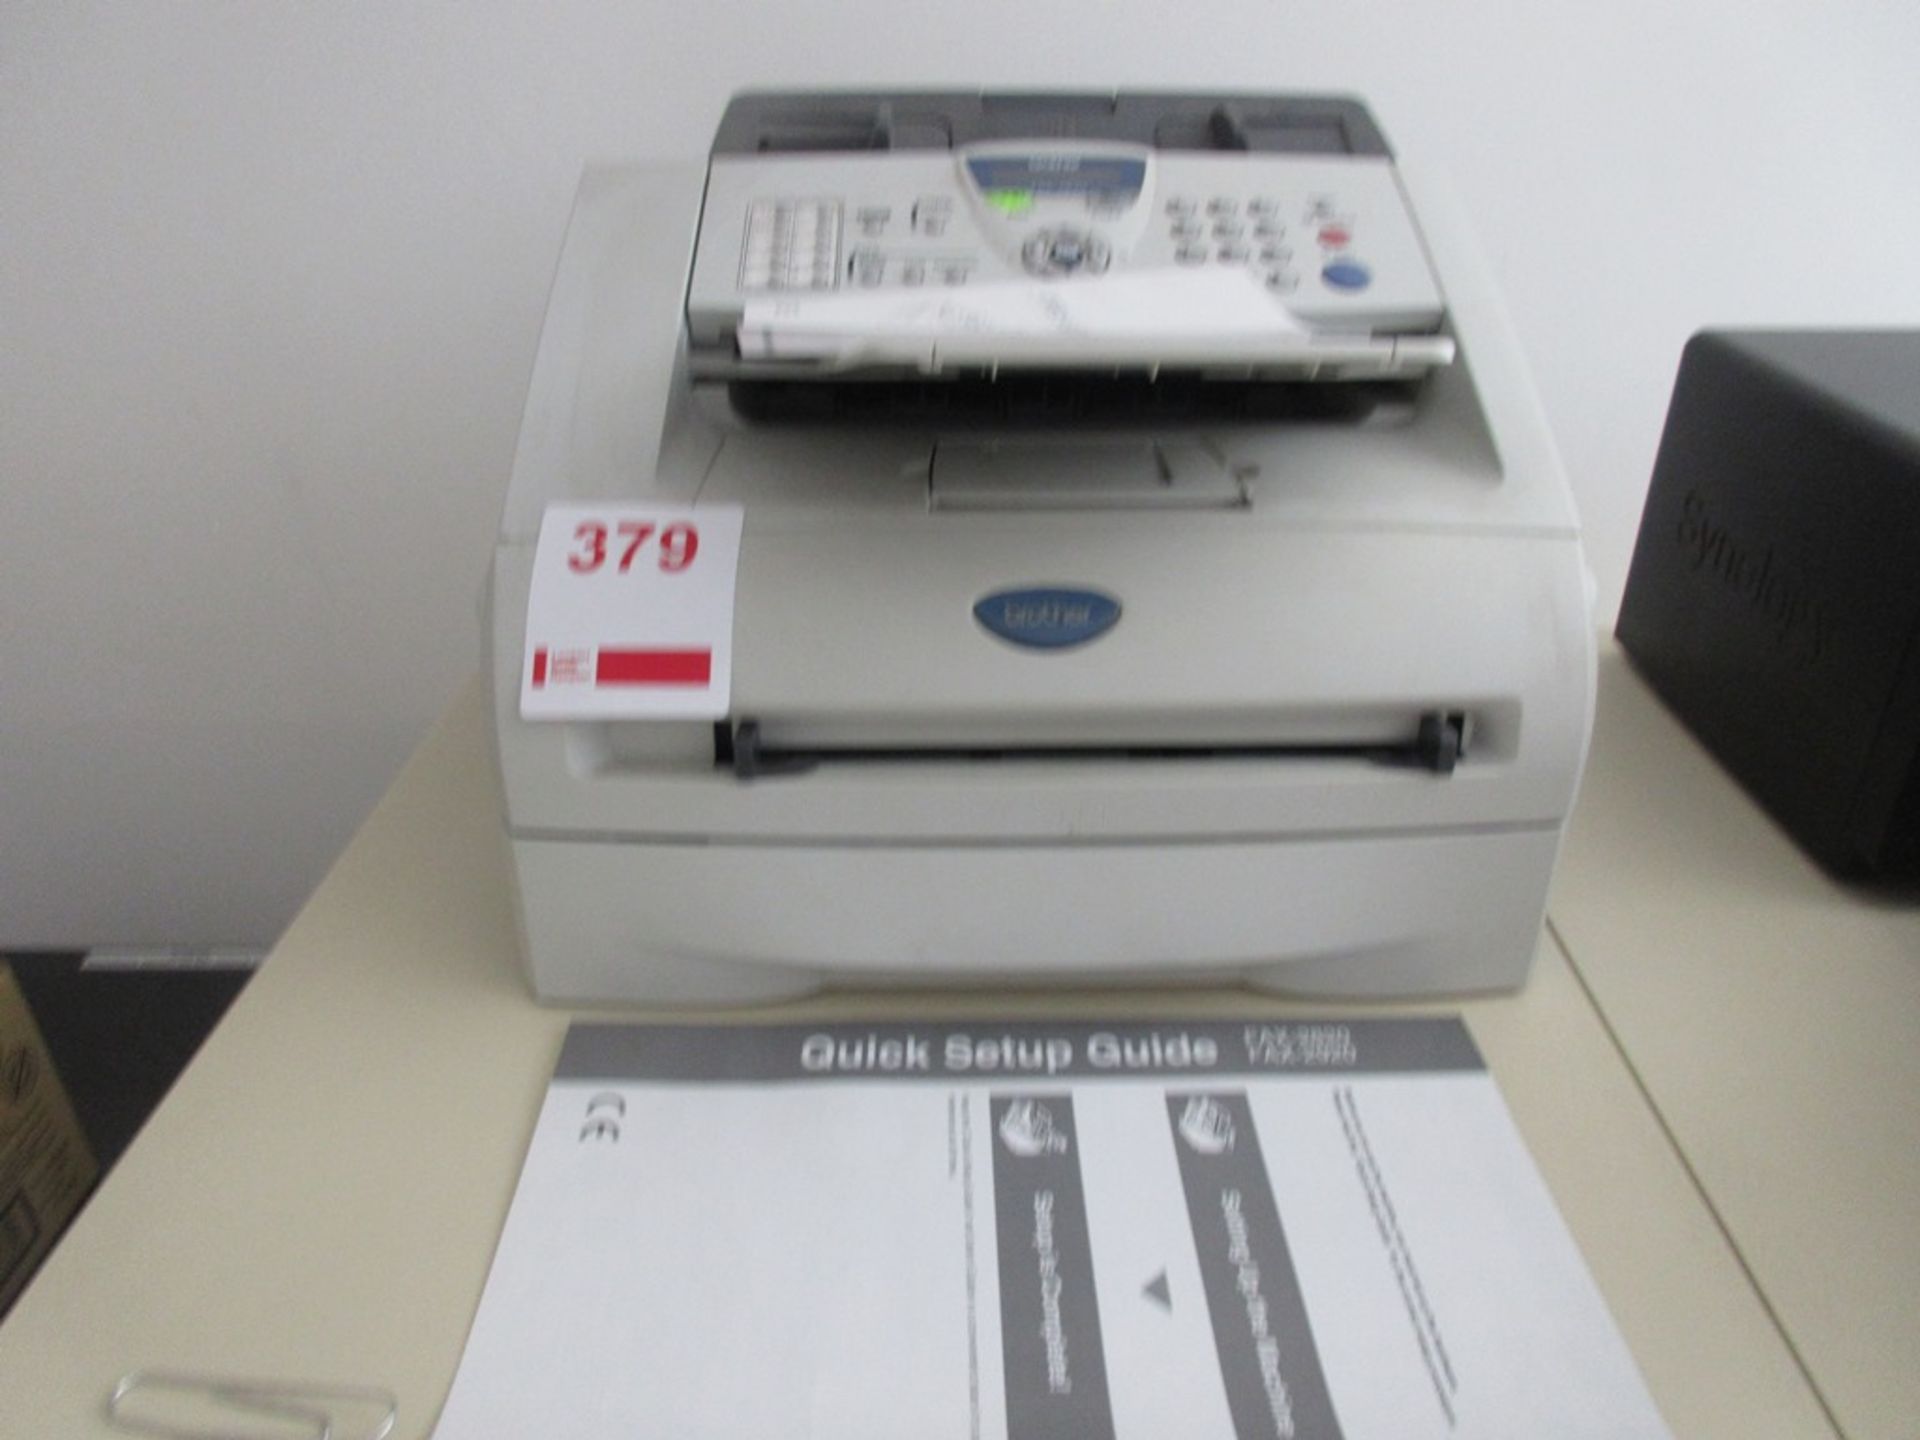 Brother Fax 2820 Fax machine